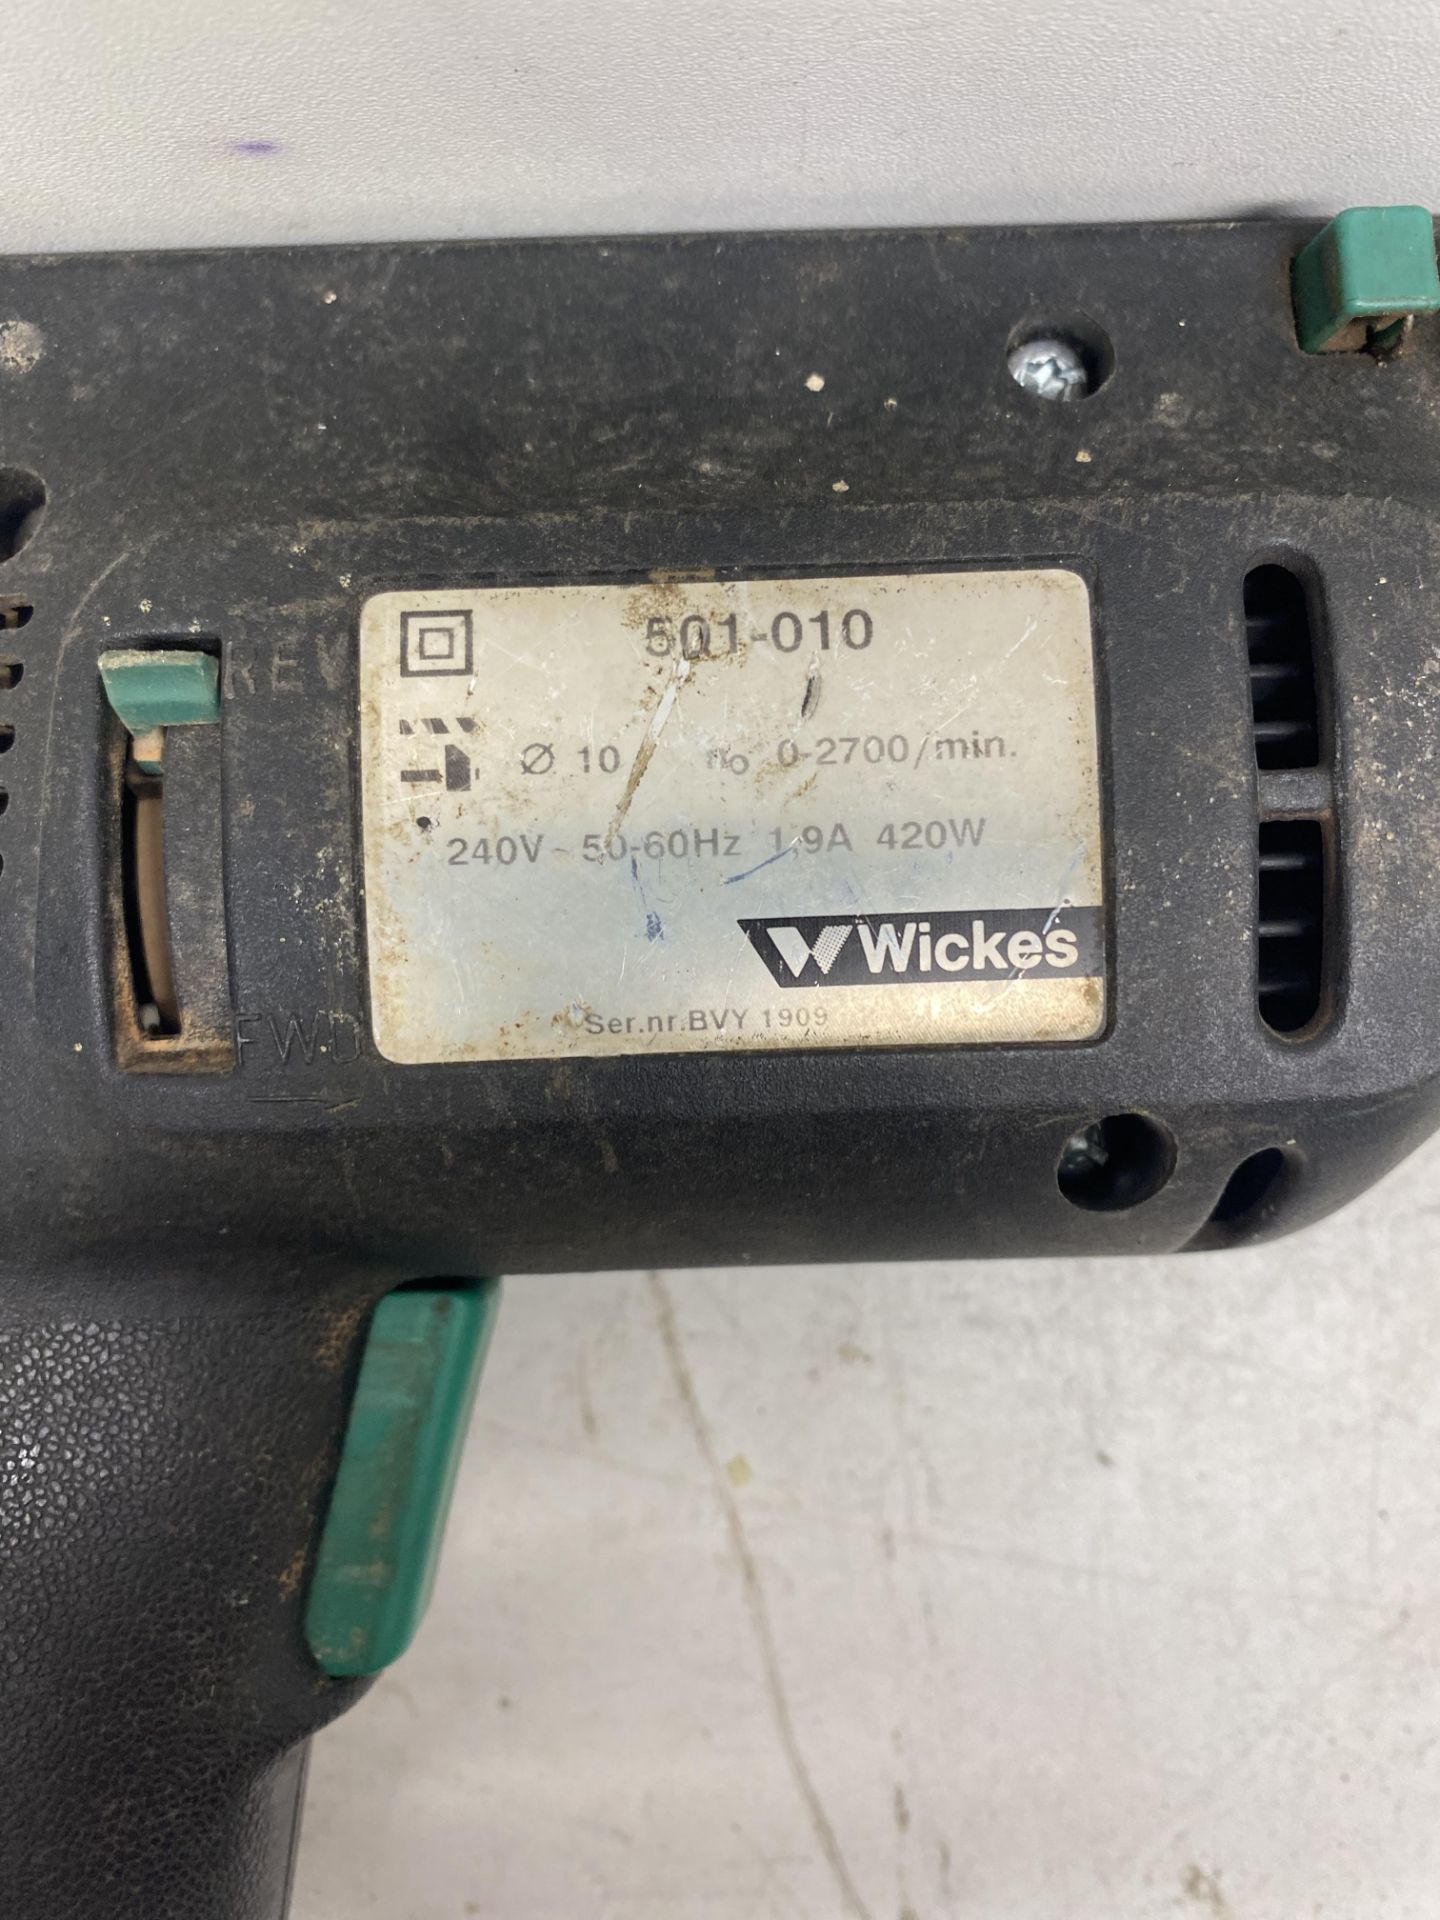 Wickes 501-010 420w Hammer Drill - Image 6 of 6